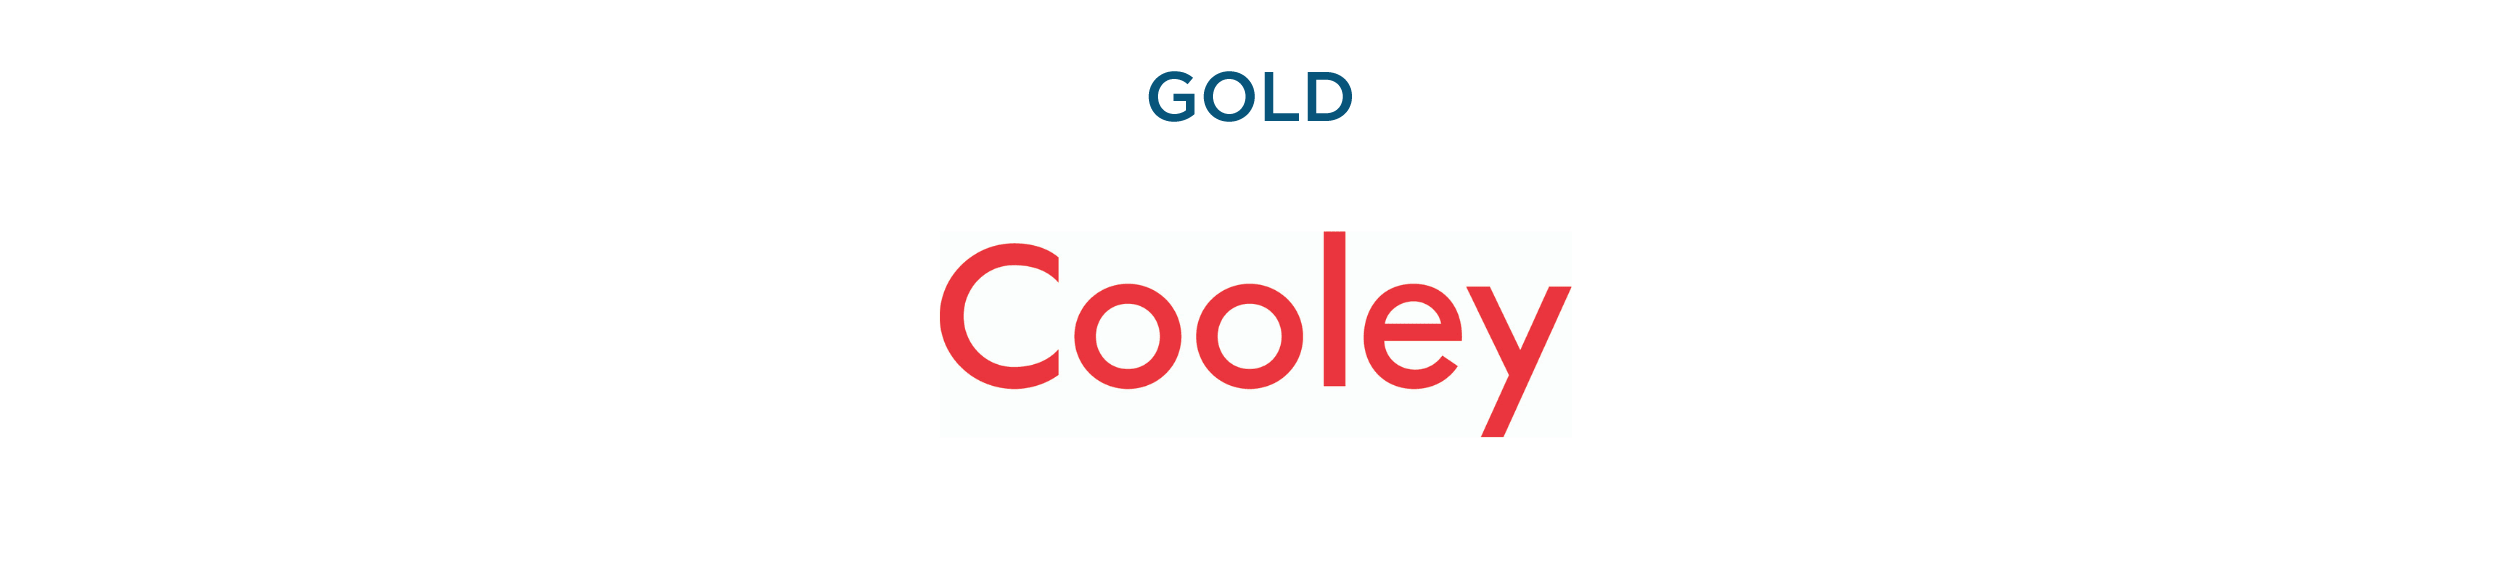 Gold Sponsors - Cooley